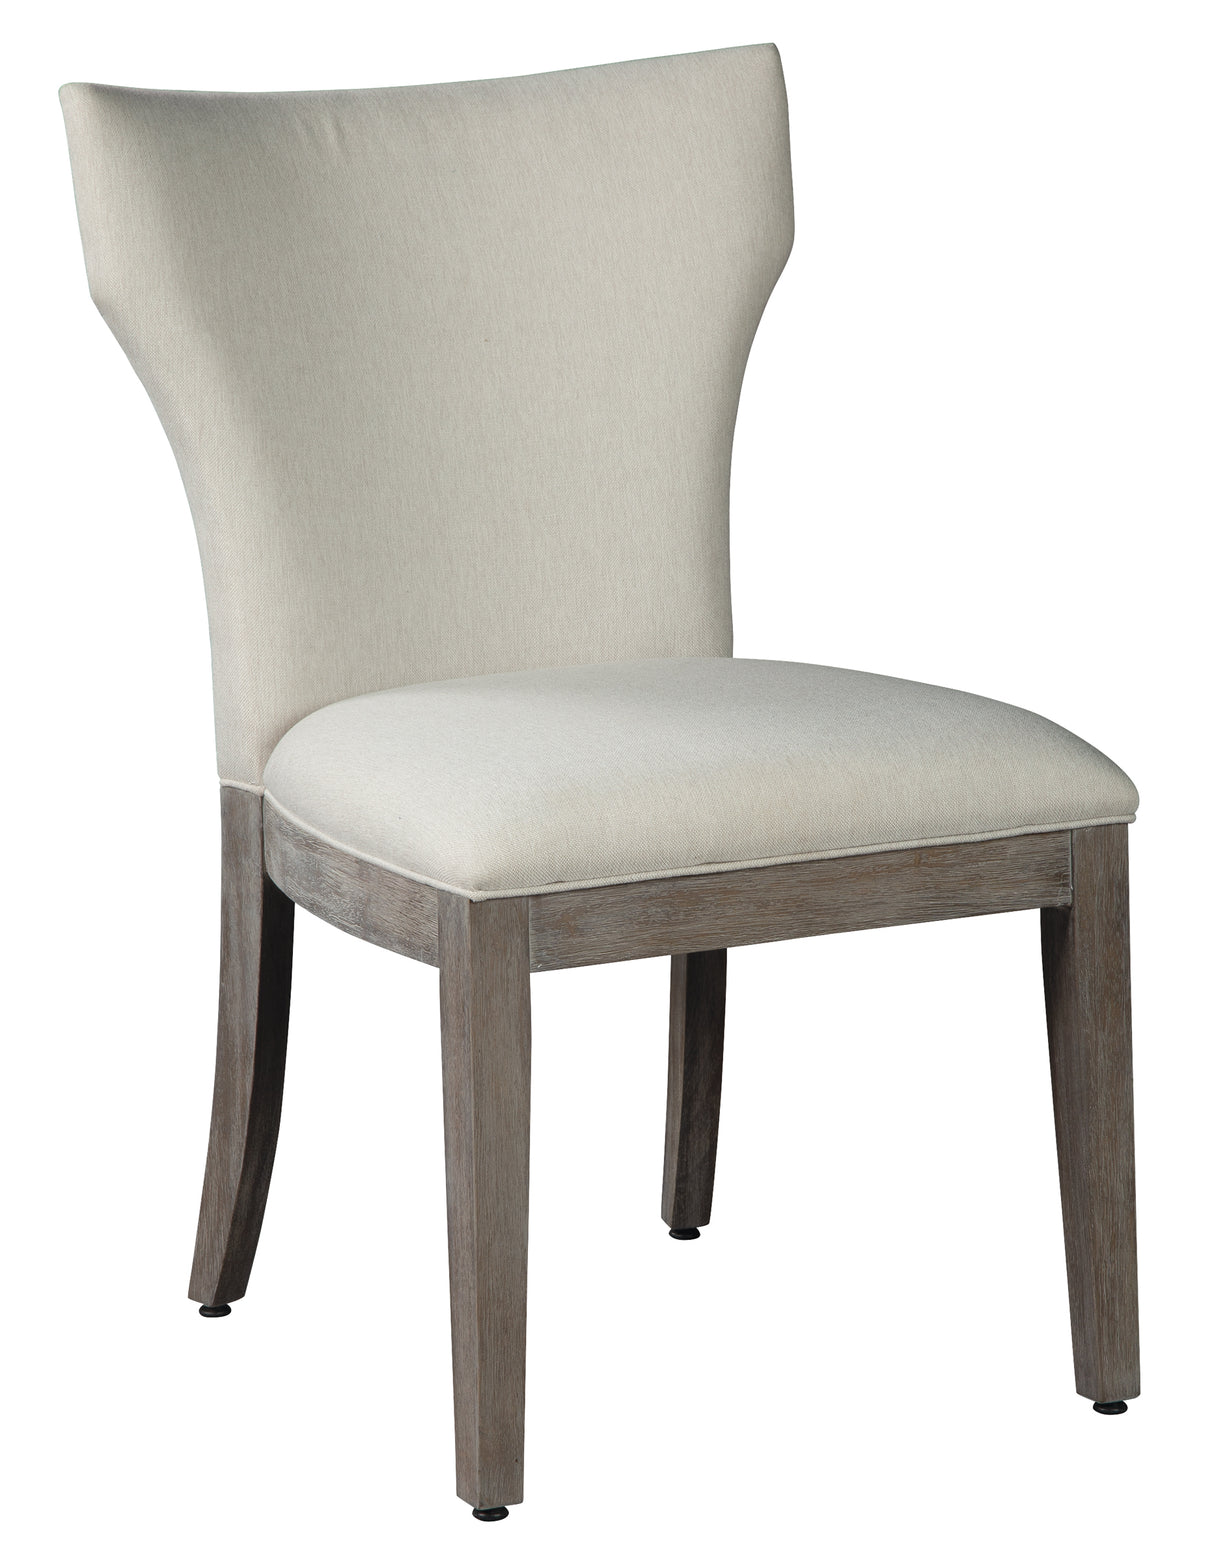 Hekman 24523 Sedona 20.5in. x 25.5in. x 35.25in. Upholstered Dining Side Chair